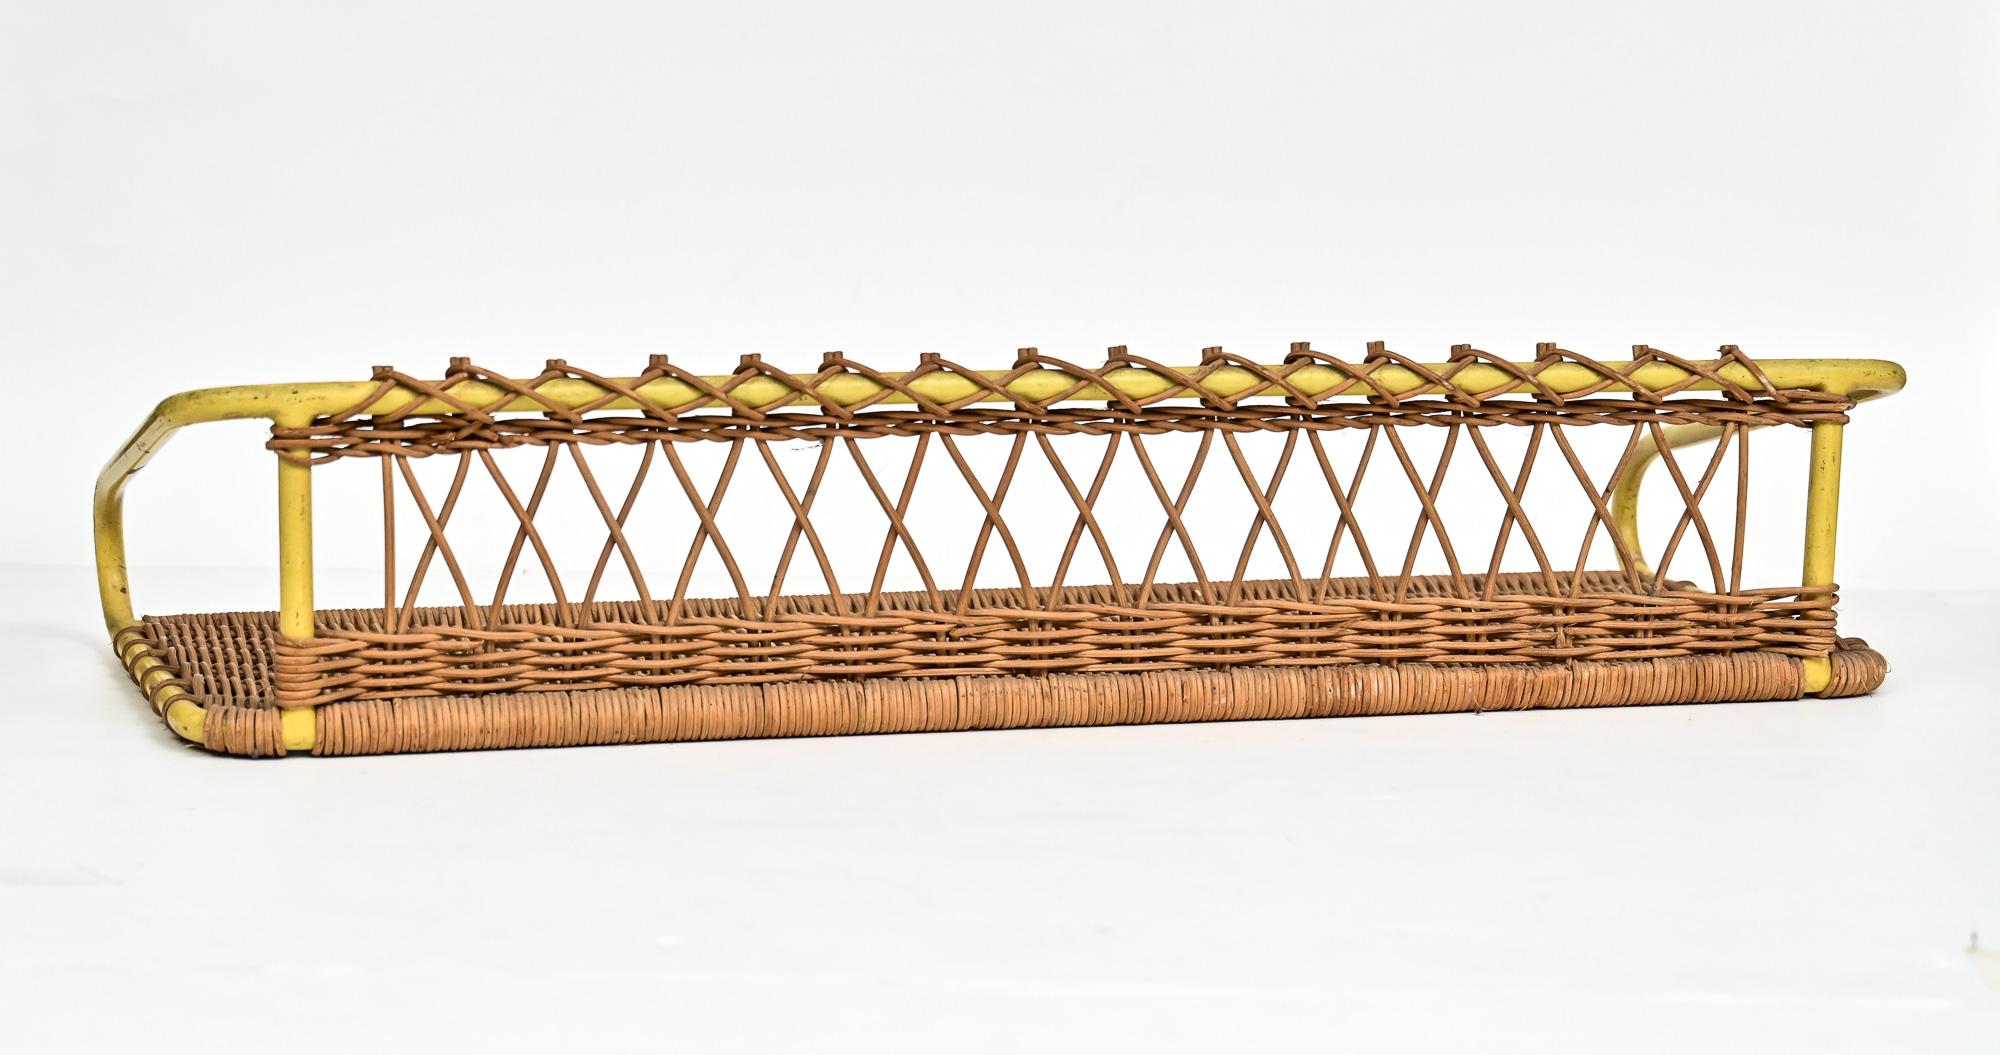 Yellow painted steel and rattan wall shelf designed by Raoul Guys in exceptional original condition

Manufactured by Airborne

France circa 1950

Similar example can be found in 

Mobilier Decoration No 5 1953